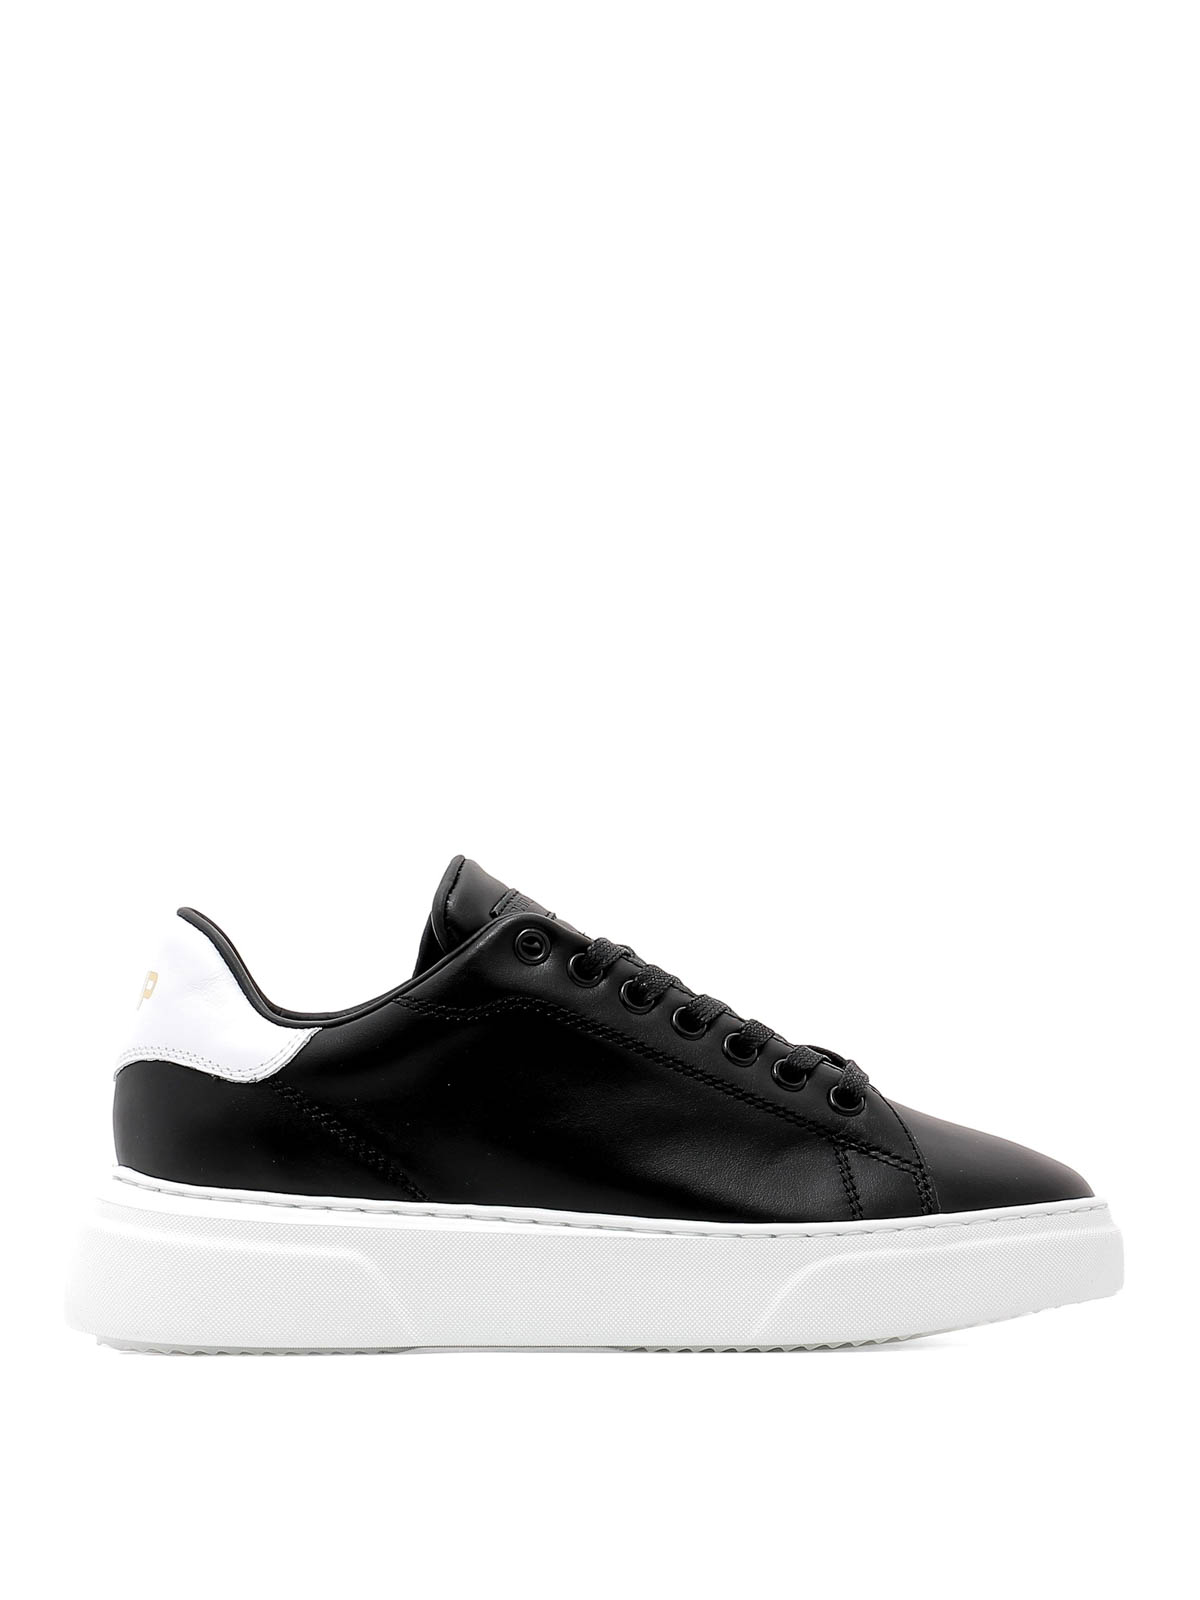 Trainers Philippe Model - Temple low top black leather sneakers 